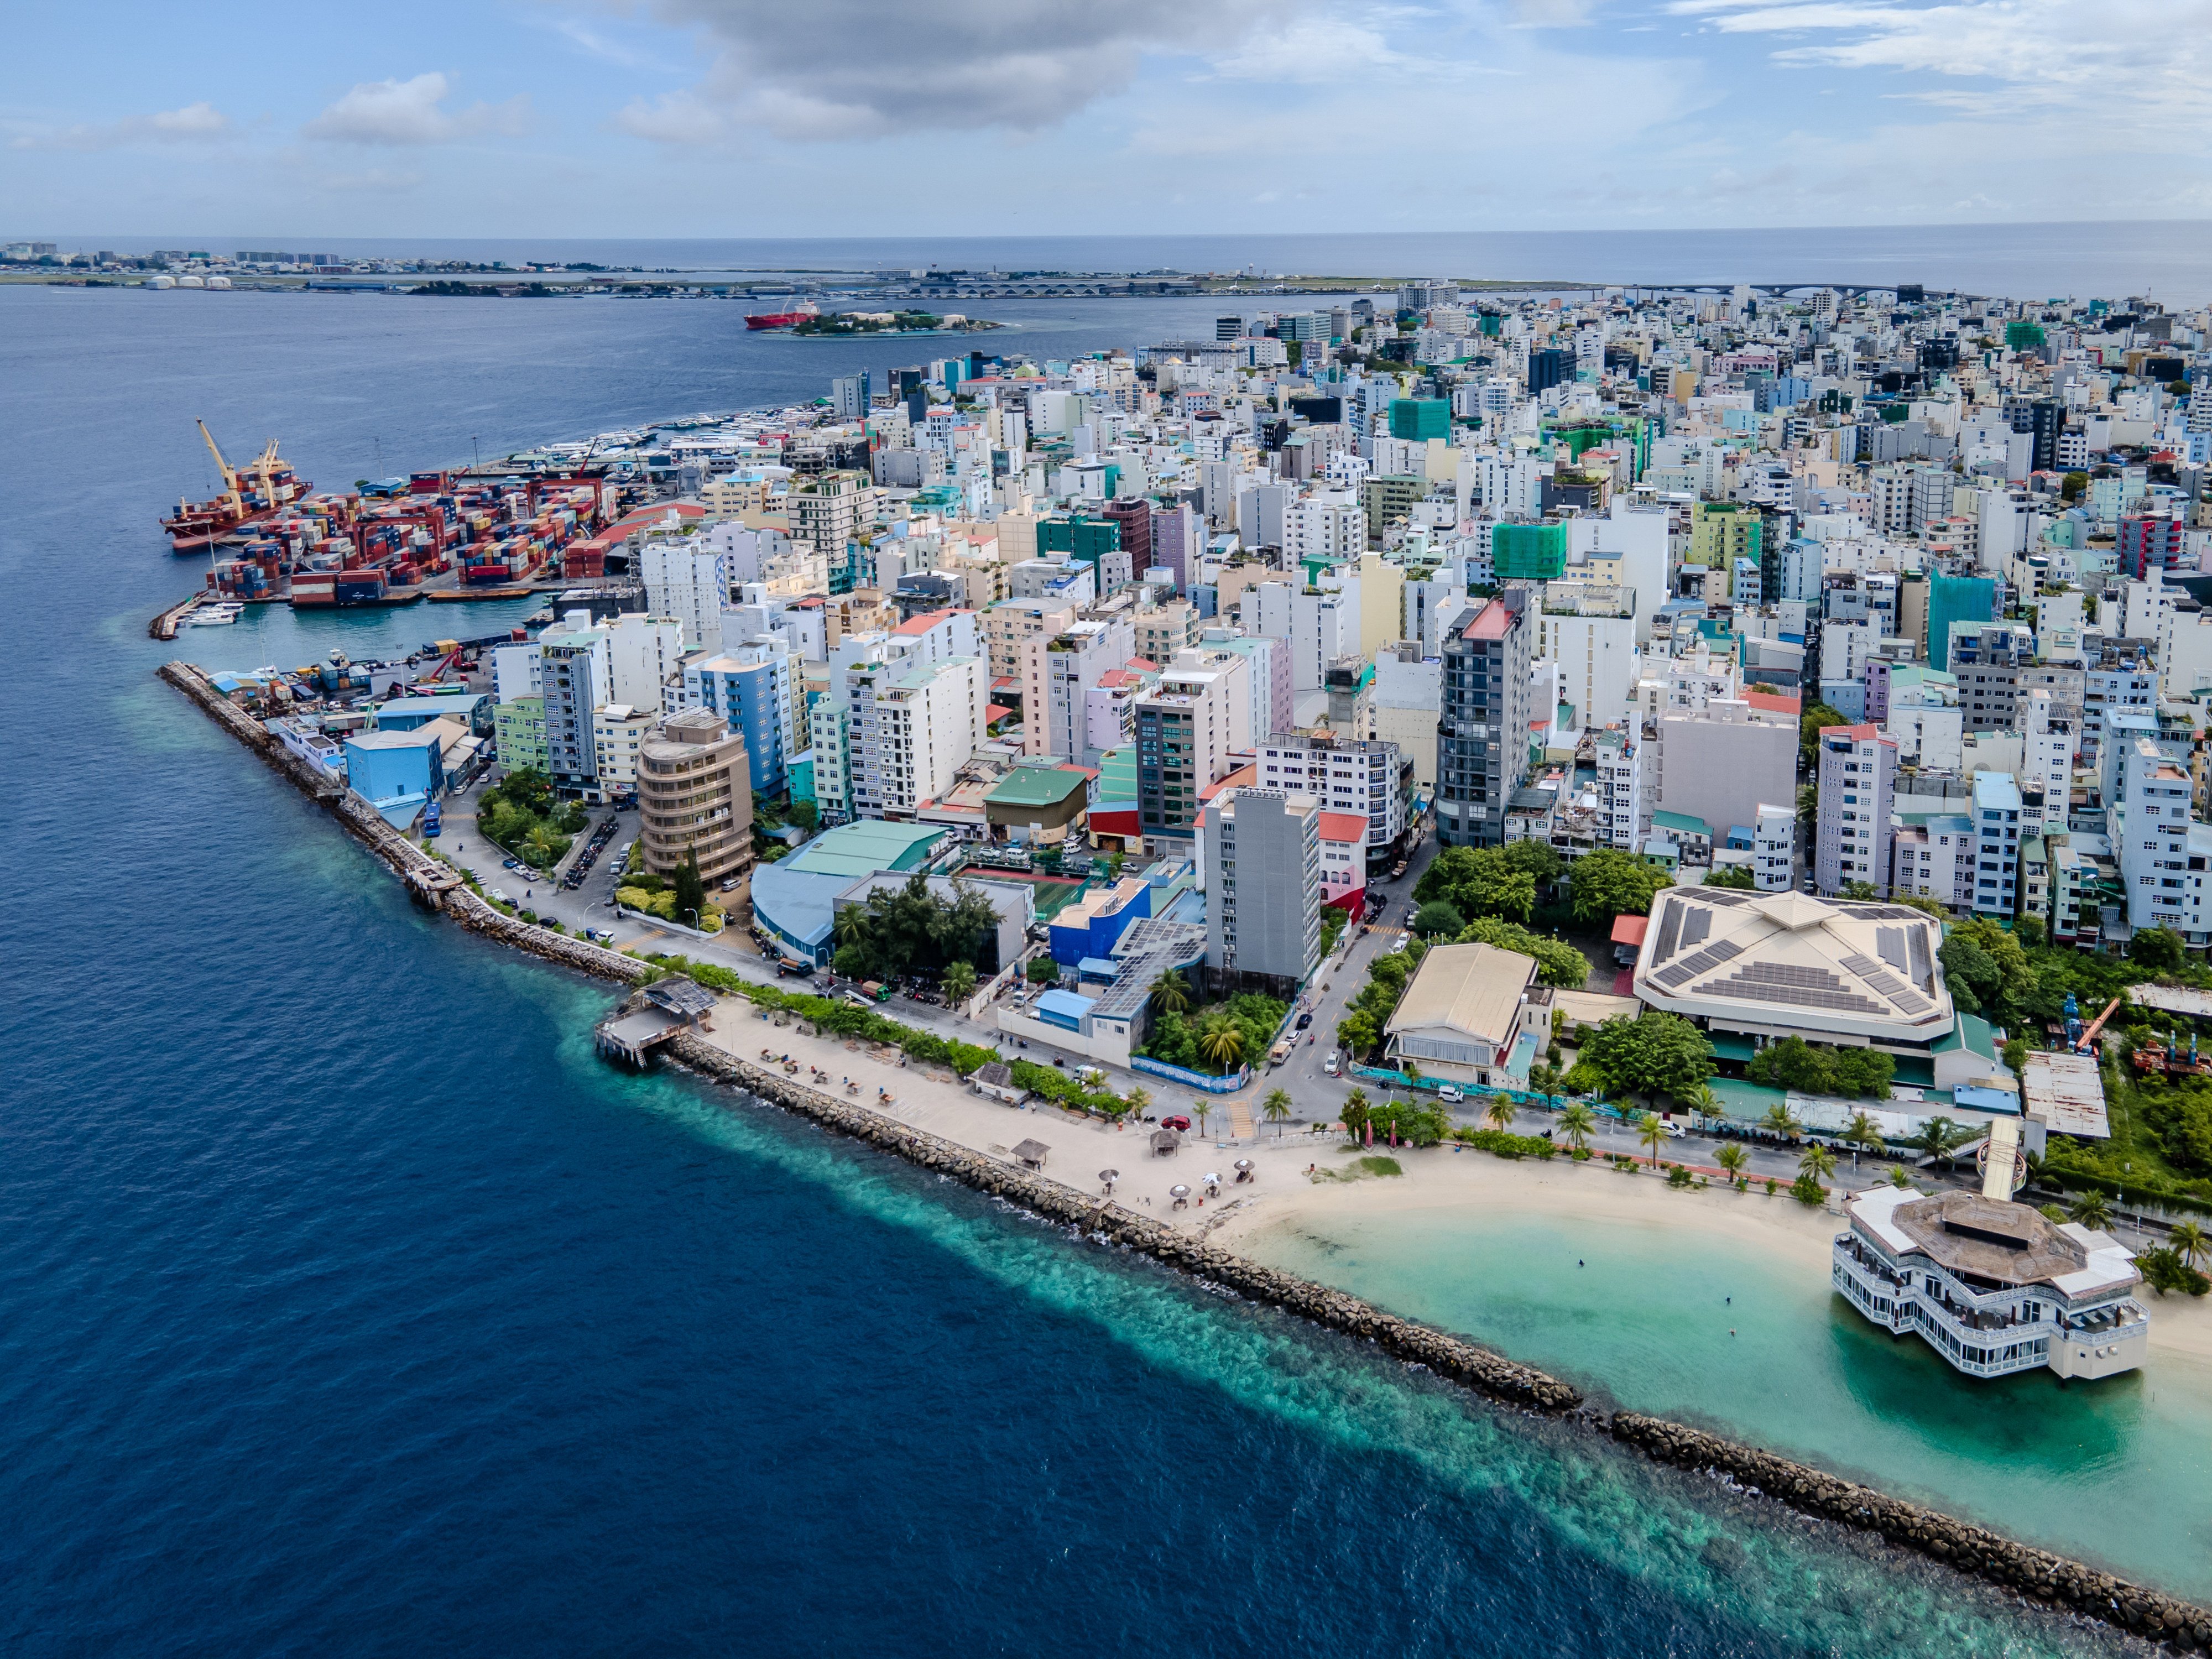 A bird’s-eye view of Male, capital of the Maldives. Photo: Anadolu via Getty Images